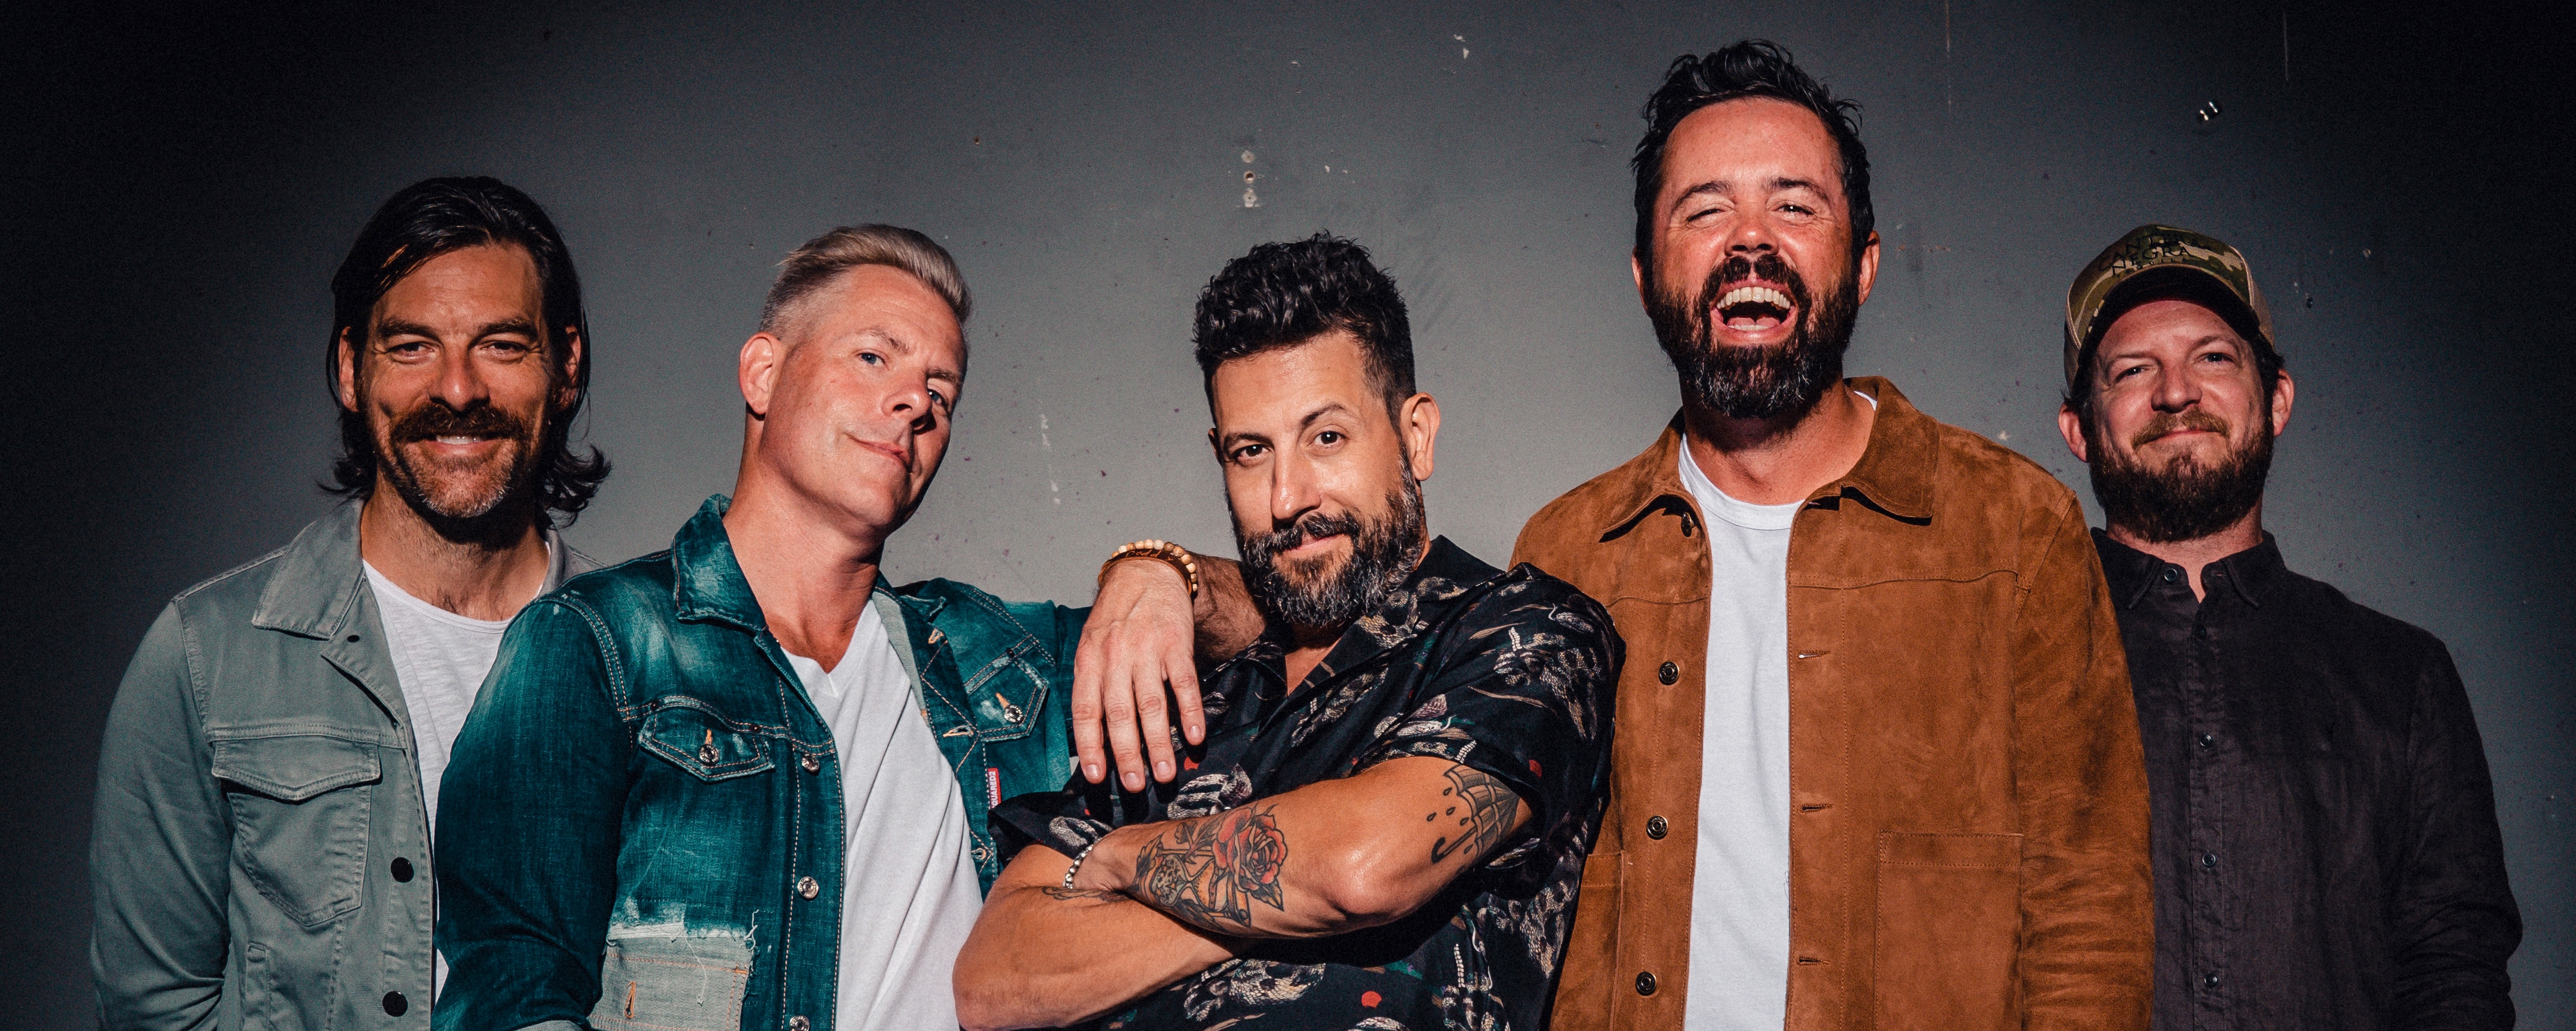 Old Dominion Drop Four-Song Sampler Ahead of Nationwide Tour